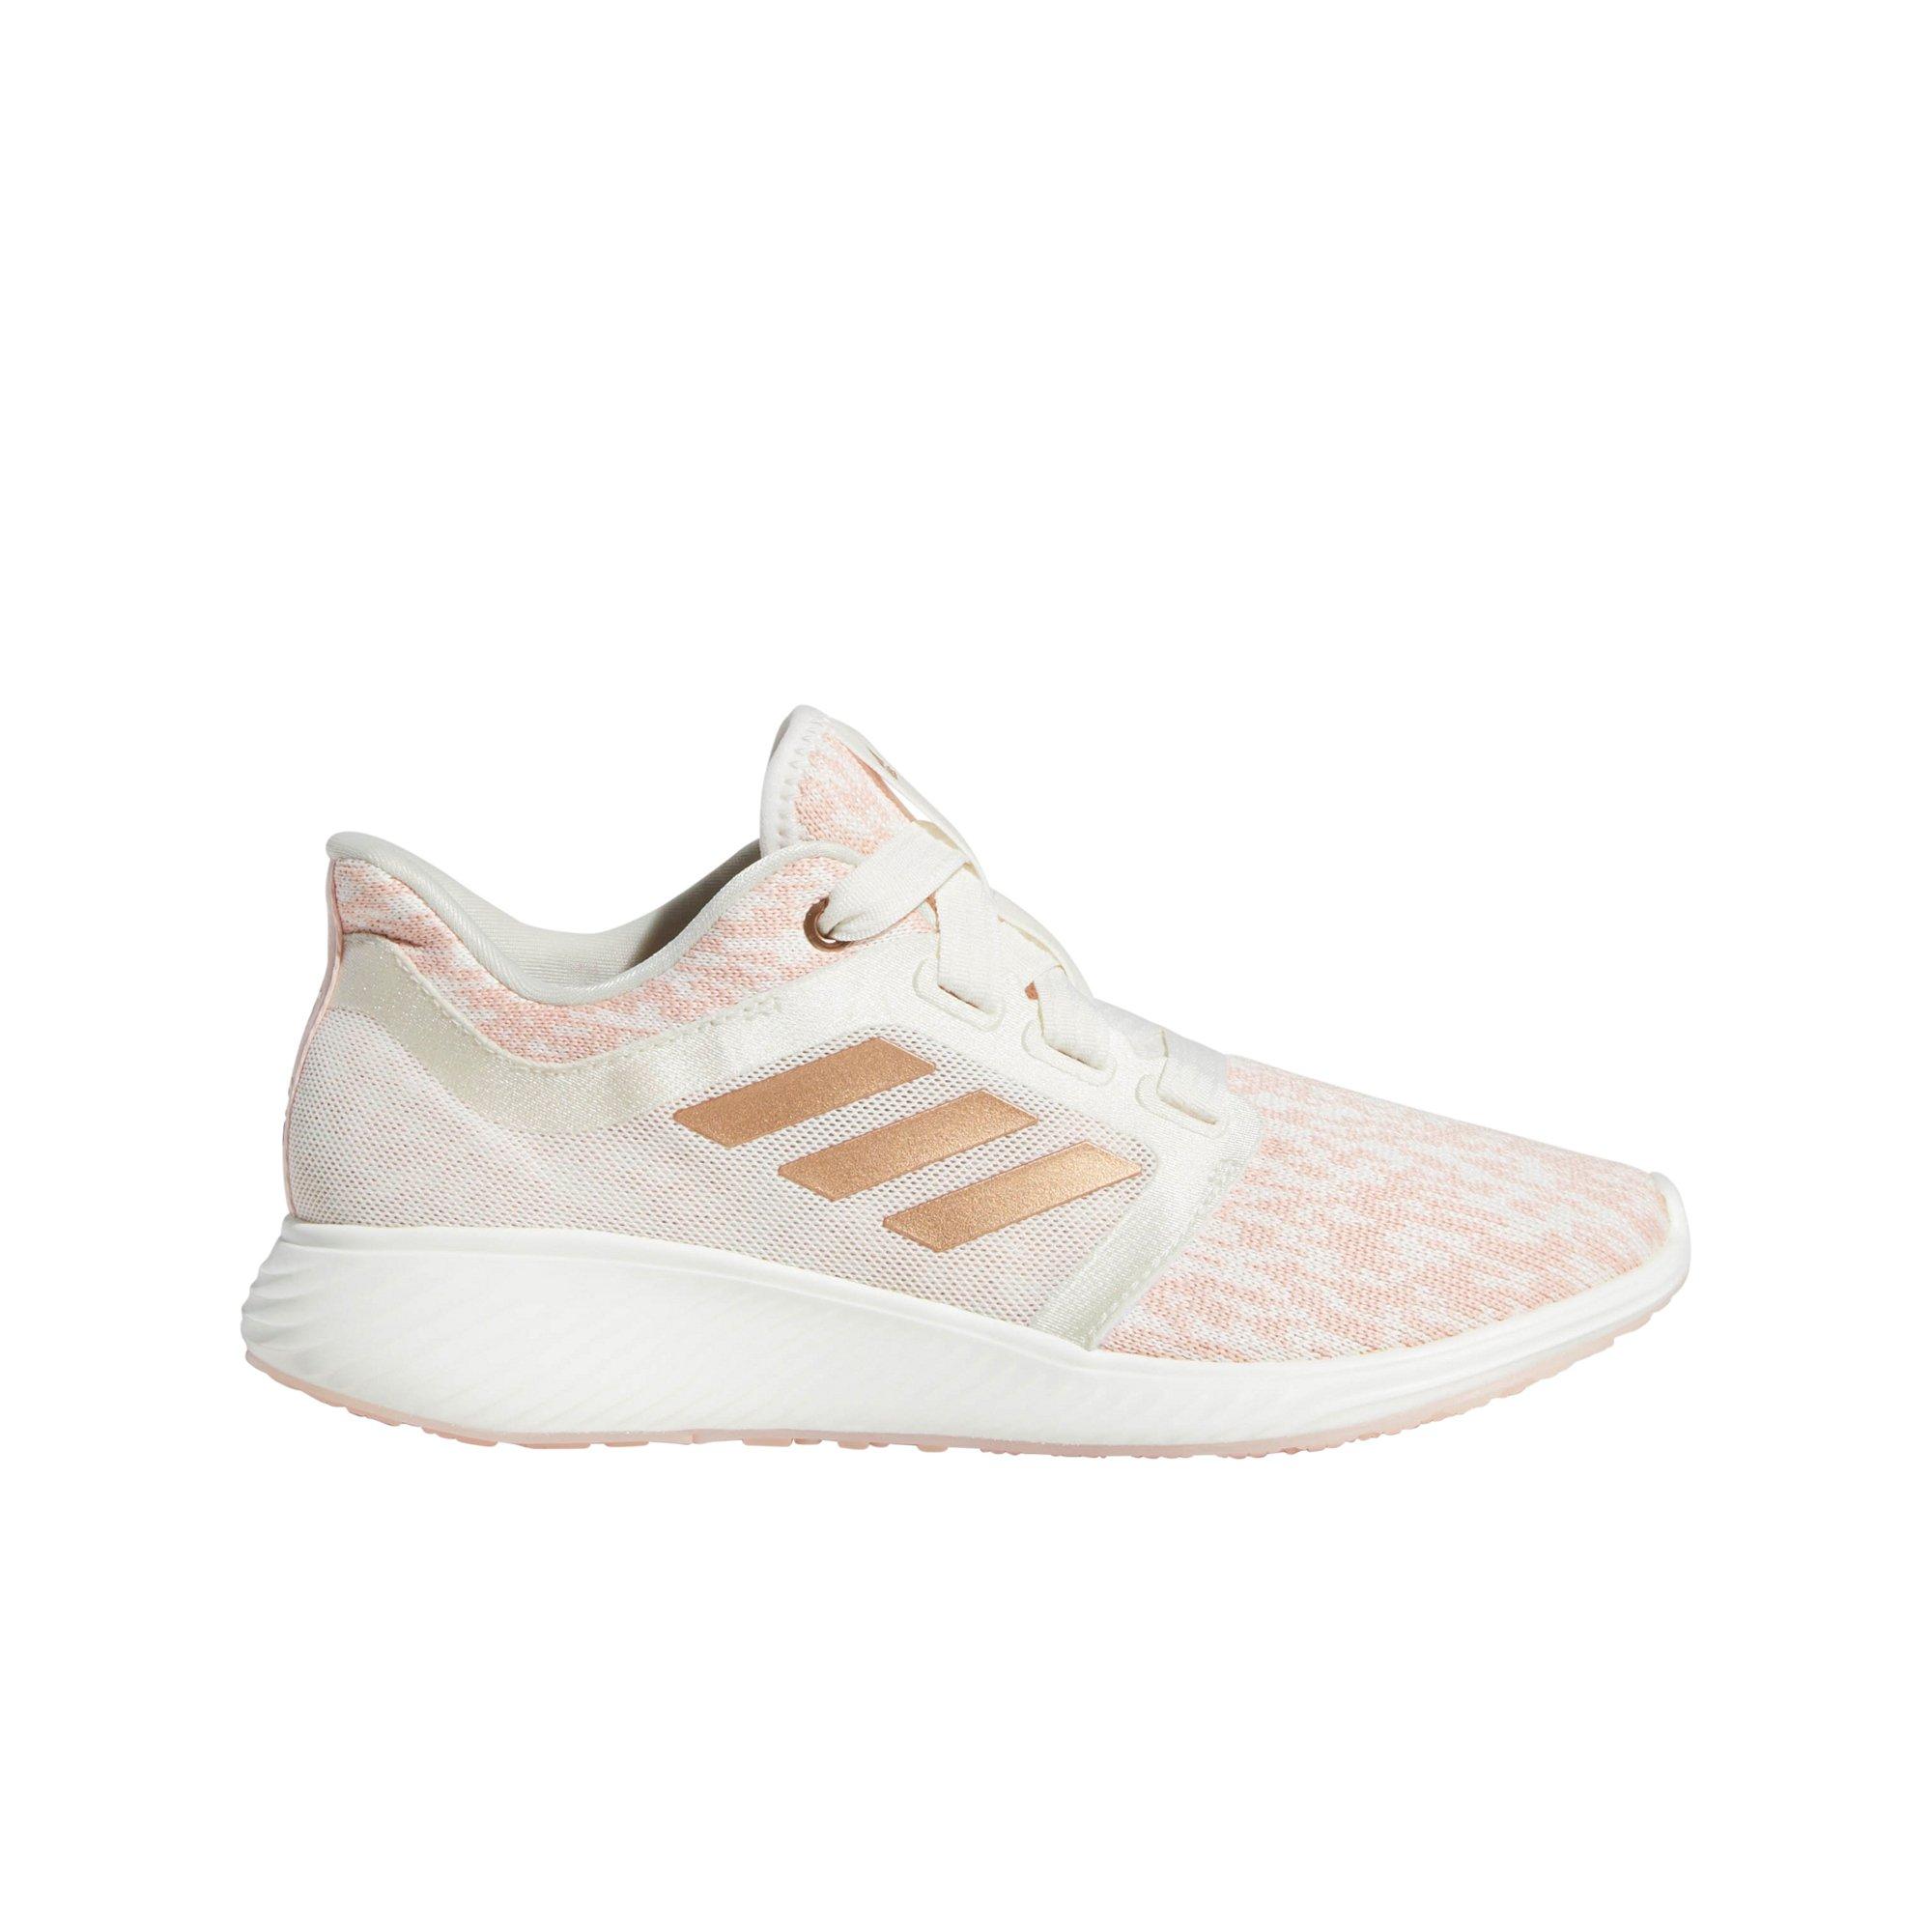 adidas edge lux 3 women's running shoes